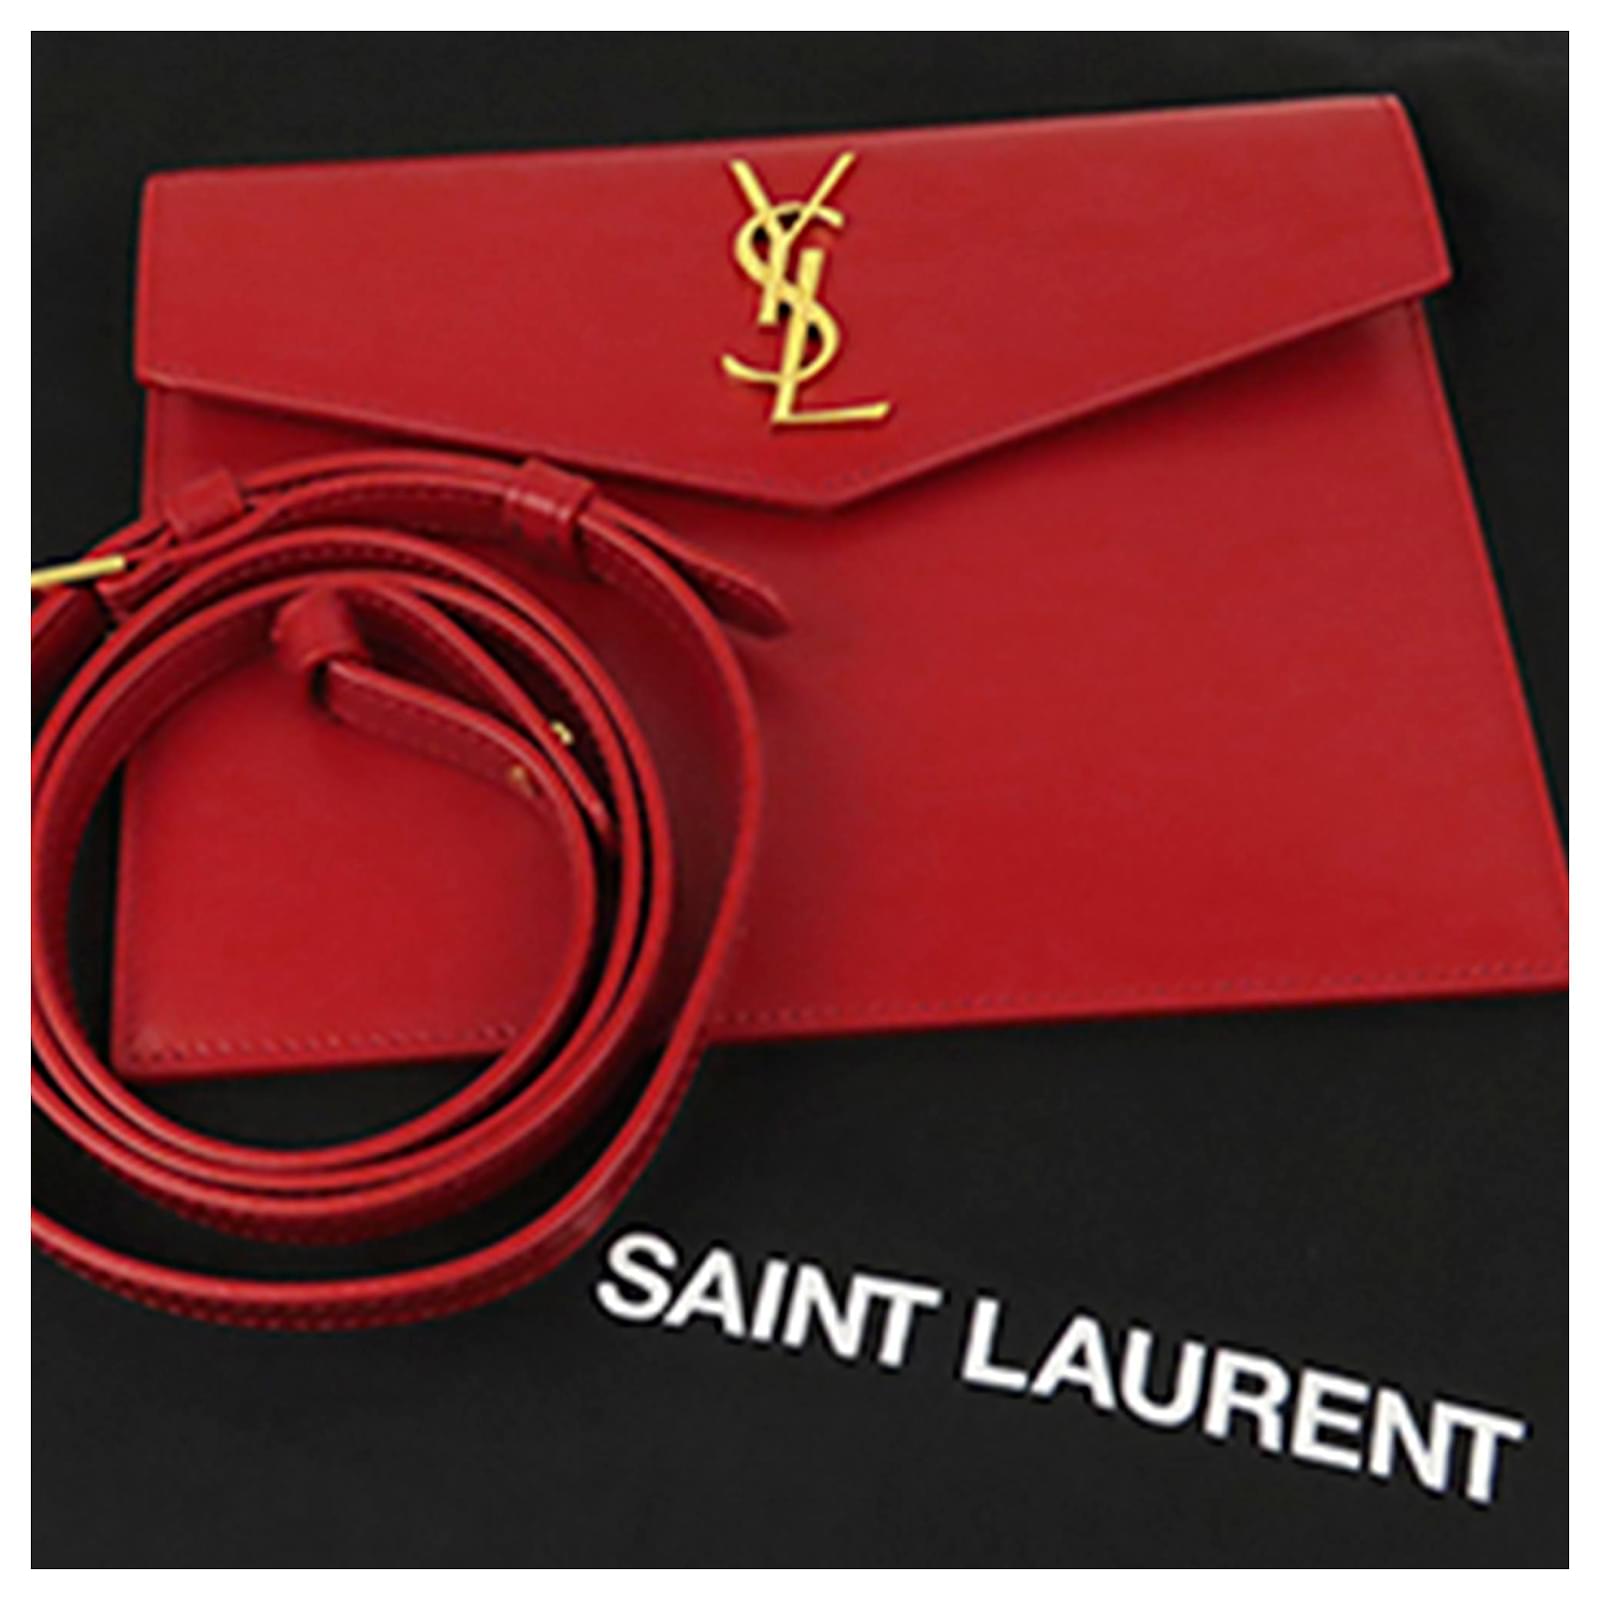 Yves Saint Laurent YSL Red Uptown Leather Satchel Pony-style